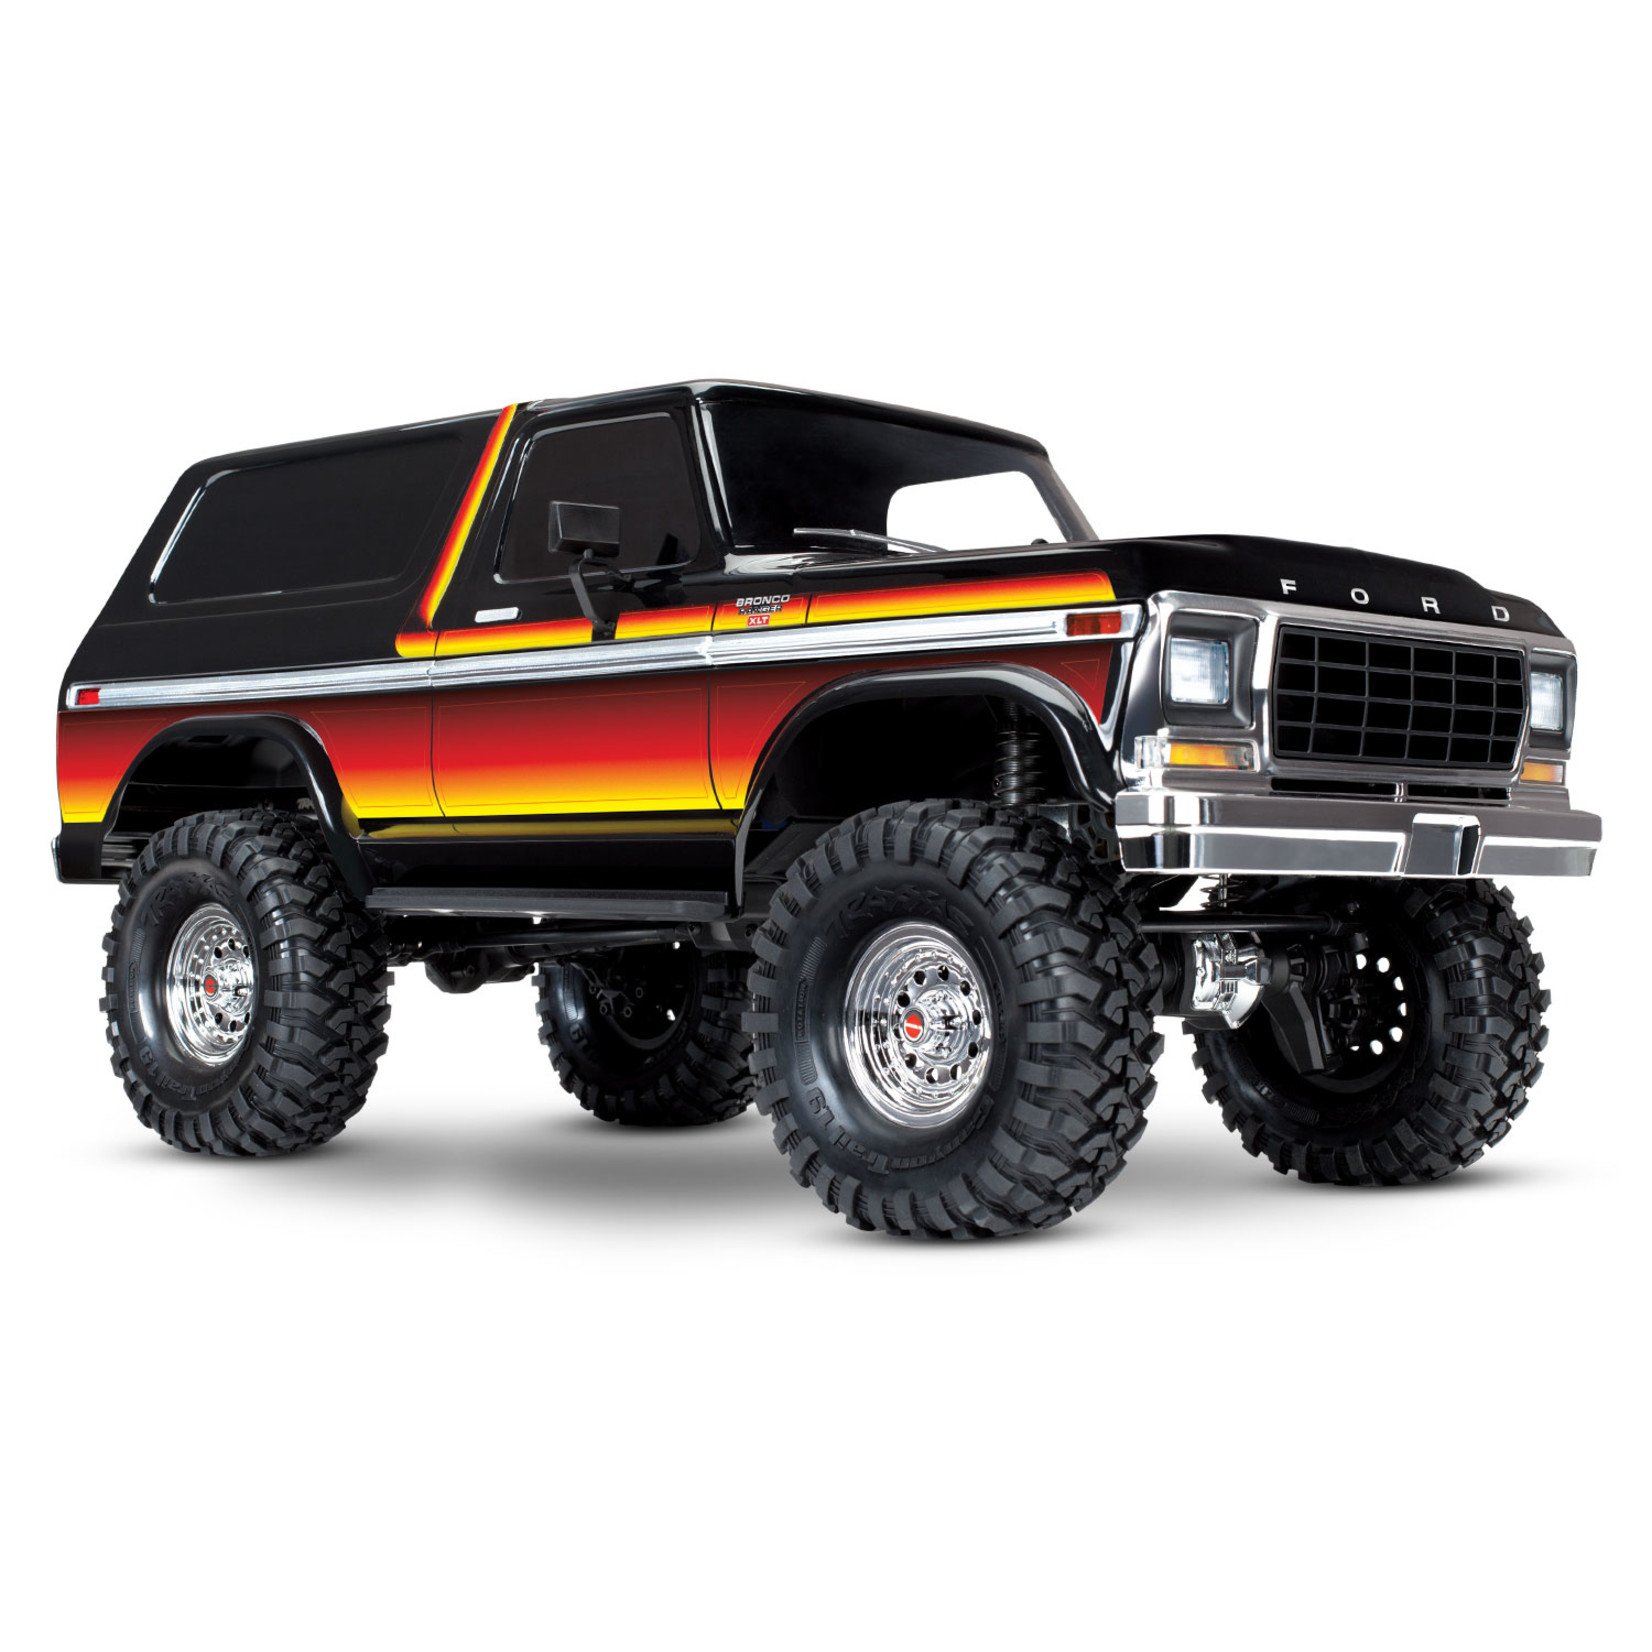 Traxxas TRX-4 Scale and Trail Crawler with 1979 Ford Bronco Body: 1/10  Scale 4WD Electric Truck